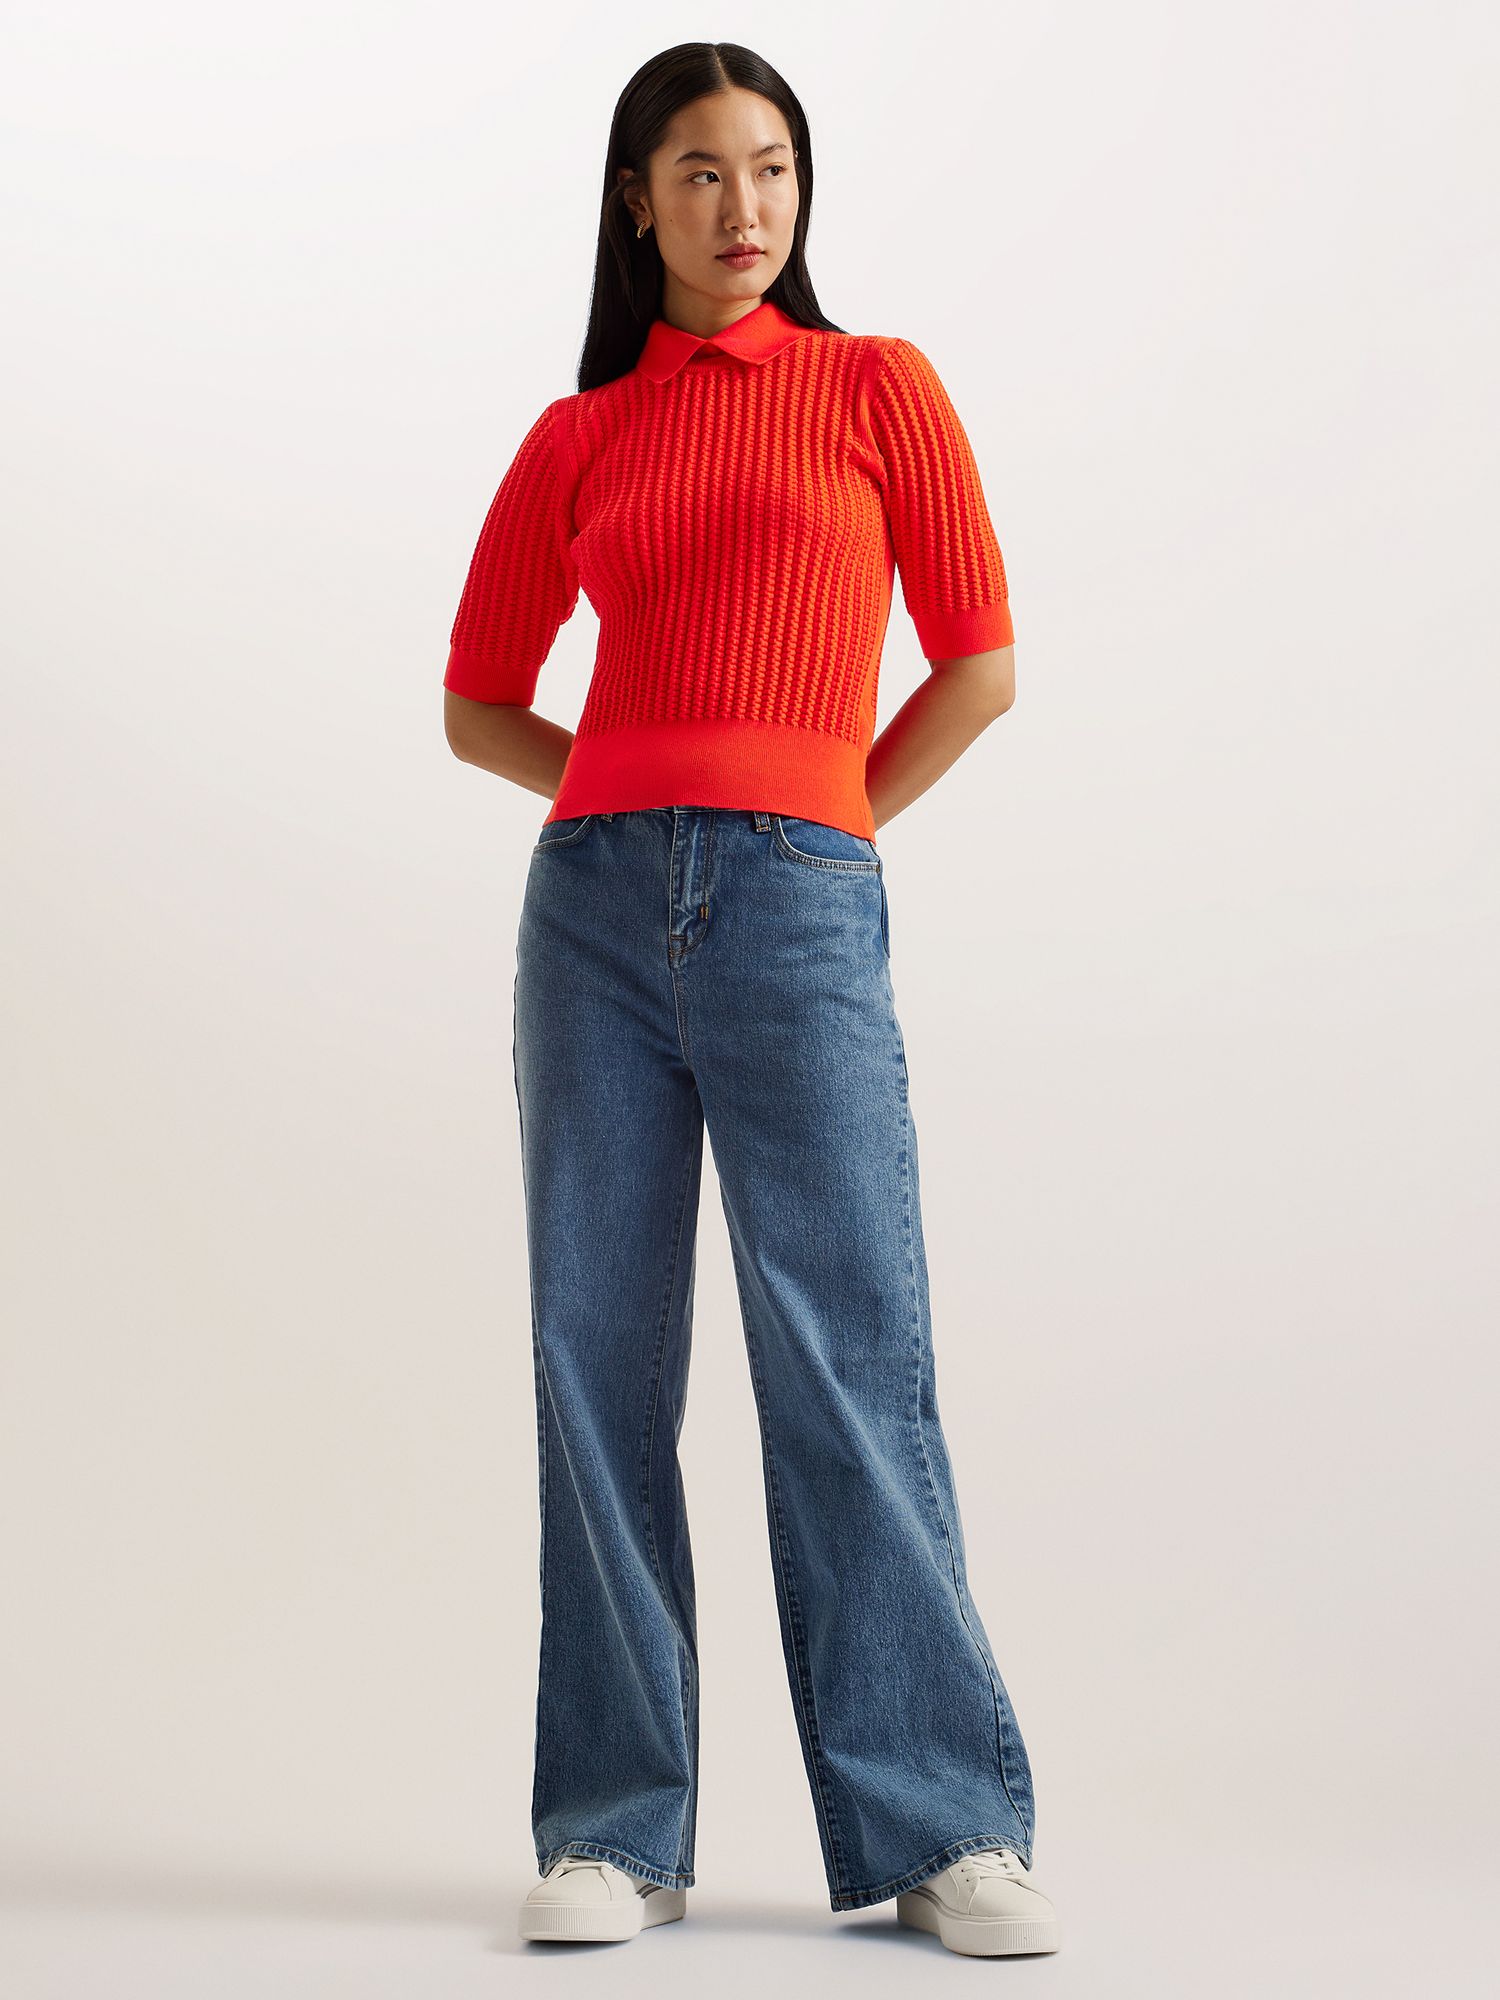 Buy Ted Baker Morliee Textured Knit Top, Red Online at johnlewis.com